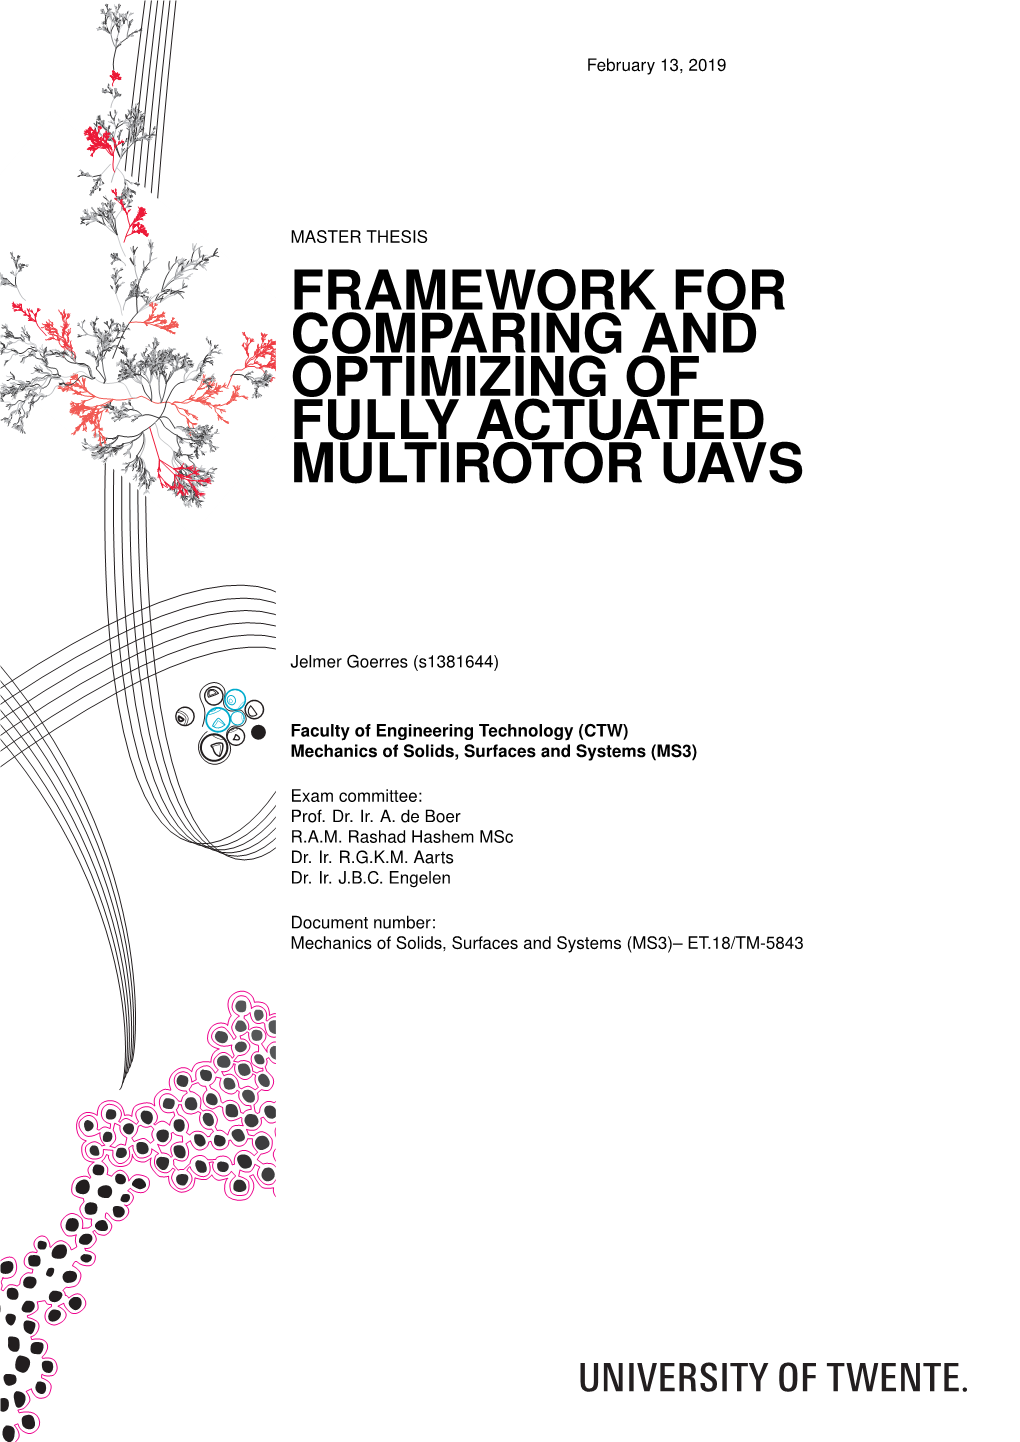 Framework for Comparing and Optimizing of Fully Actuated Multirotor Uavs